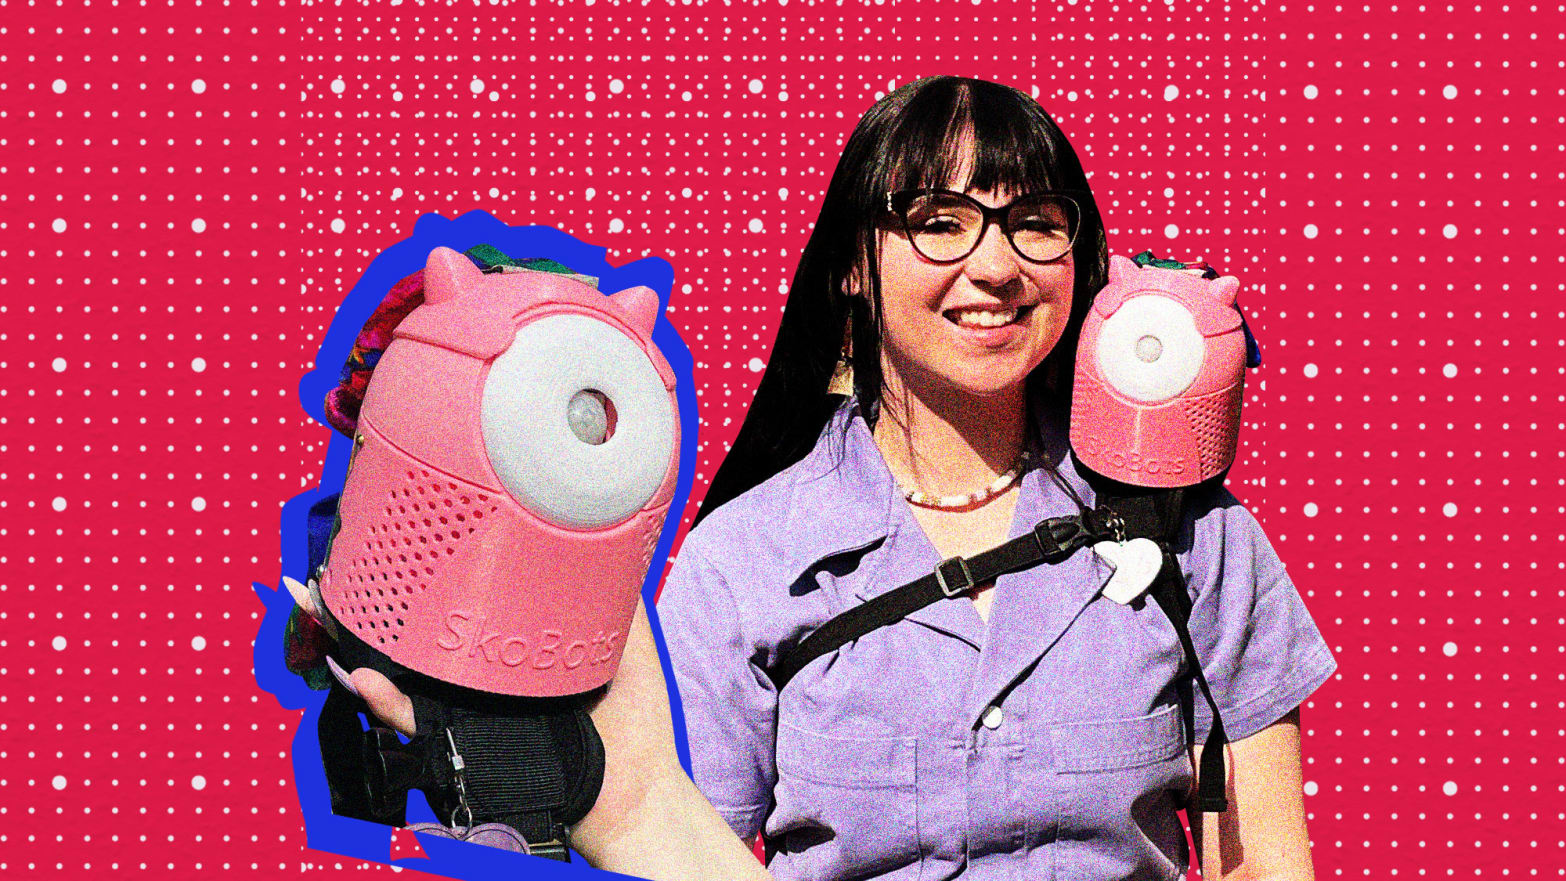 SkoBot inventor Danielle Boyer wears one of her customizable language-teaching devices strapped to her shoulder. 